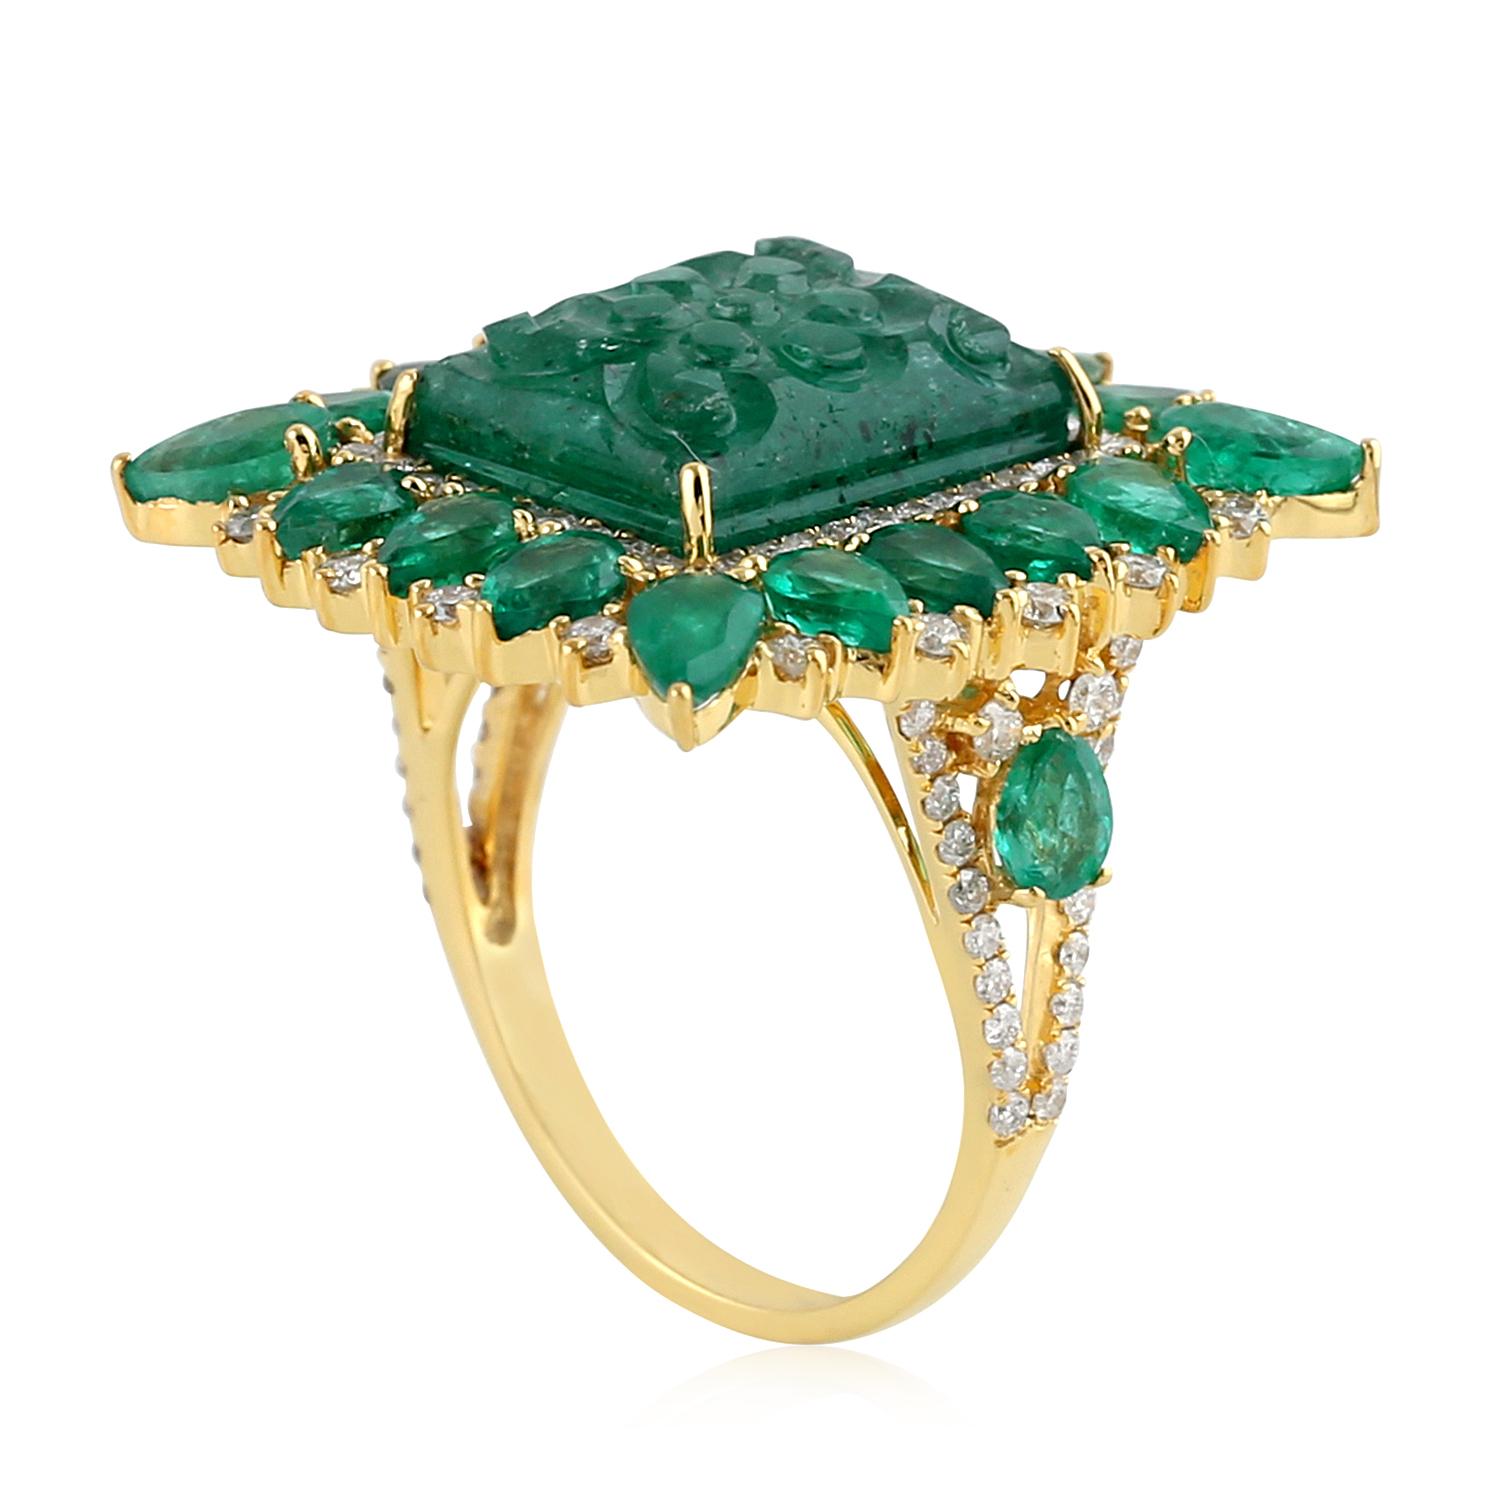 Square Shape Emerald Cocktail Ring with Diamonds Made in 18k Yellow Gold In New Condition For Sale In New York, NY